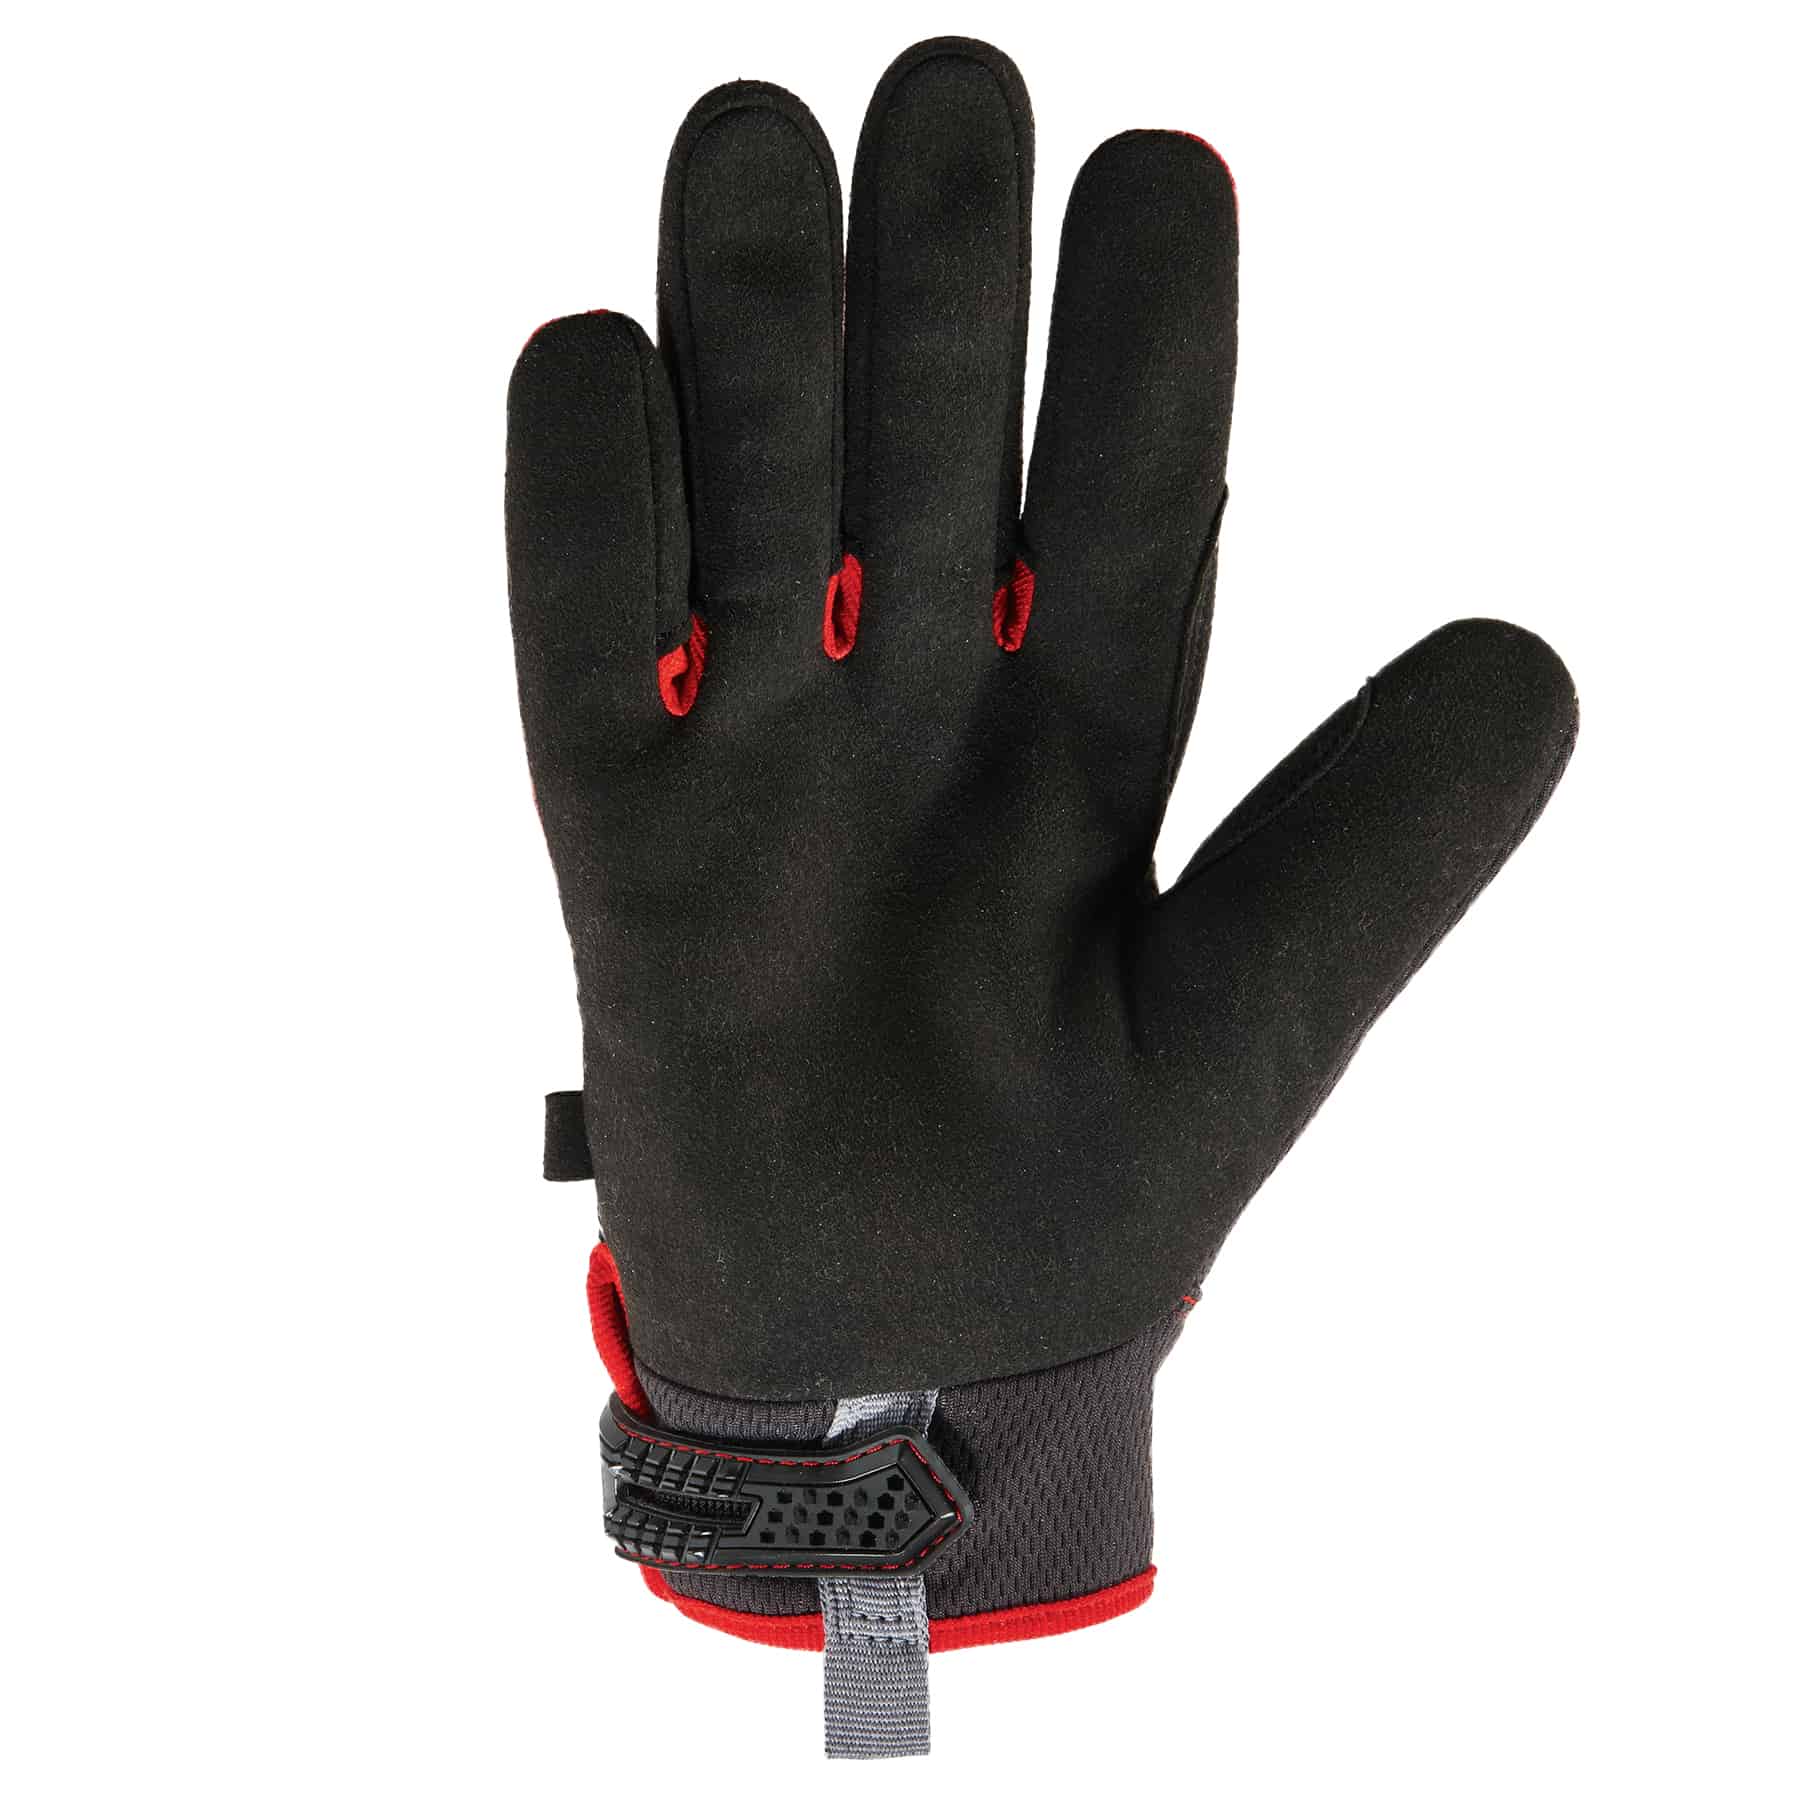 Basic Electrician & Contractor Protection – Gloves